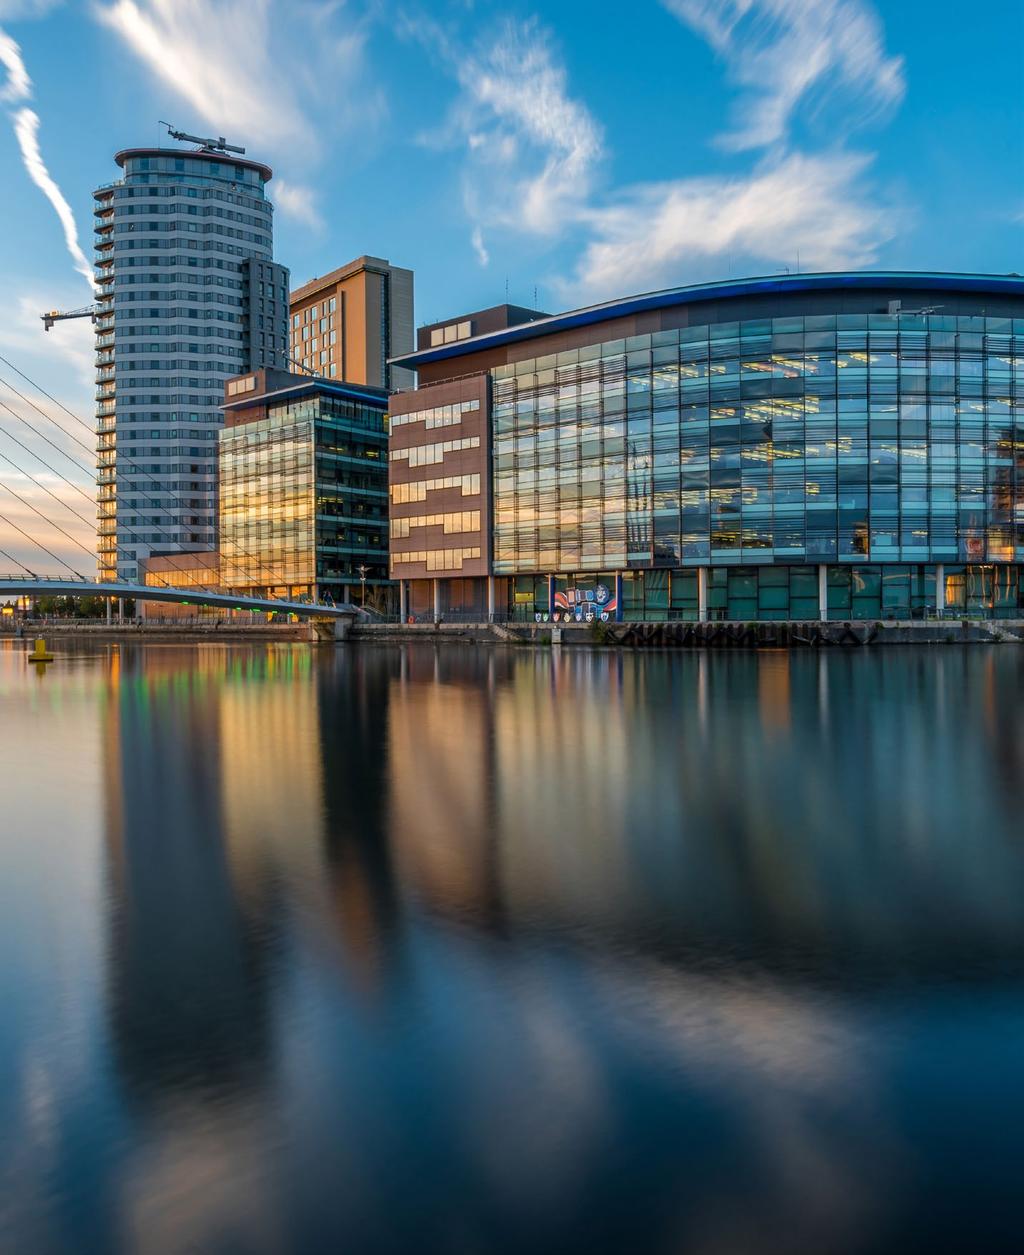 6 Why Manchester Manchester expects 80,000 new residents by 2033 Manchester was one of the world s first cities to go through the industrial revolution and today, it is the second largest economy in